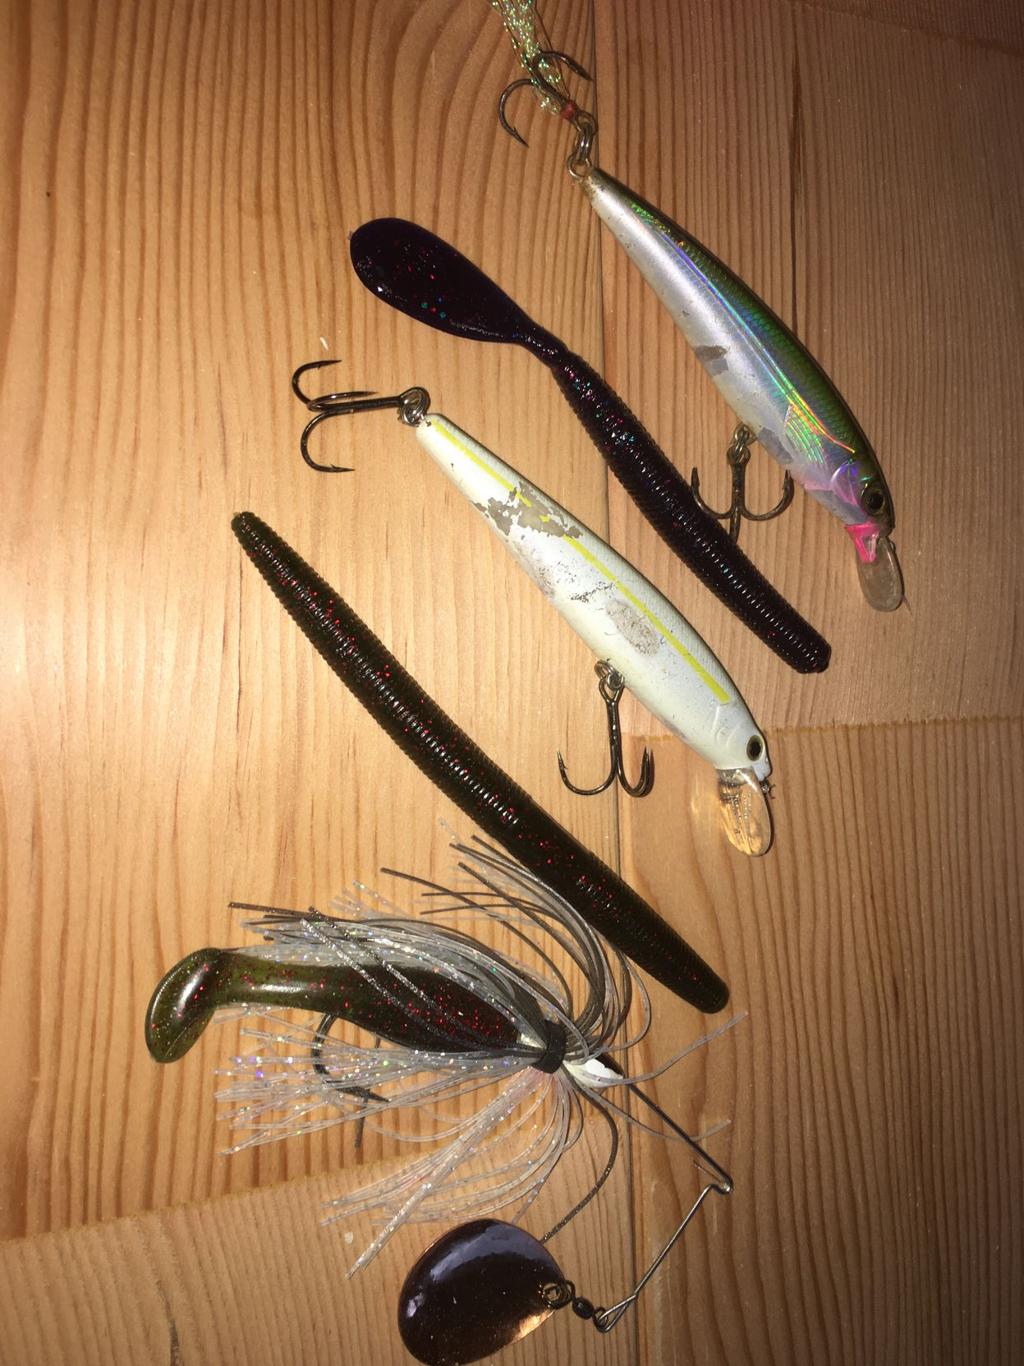 Top 3 Lures For Fishing Coastal Marshes (For Redfish, Trout